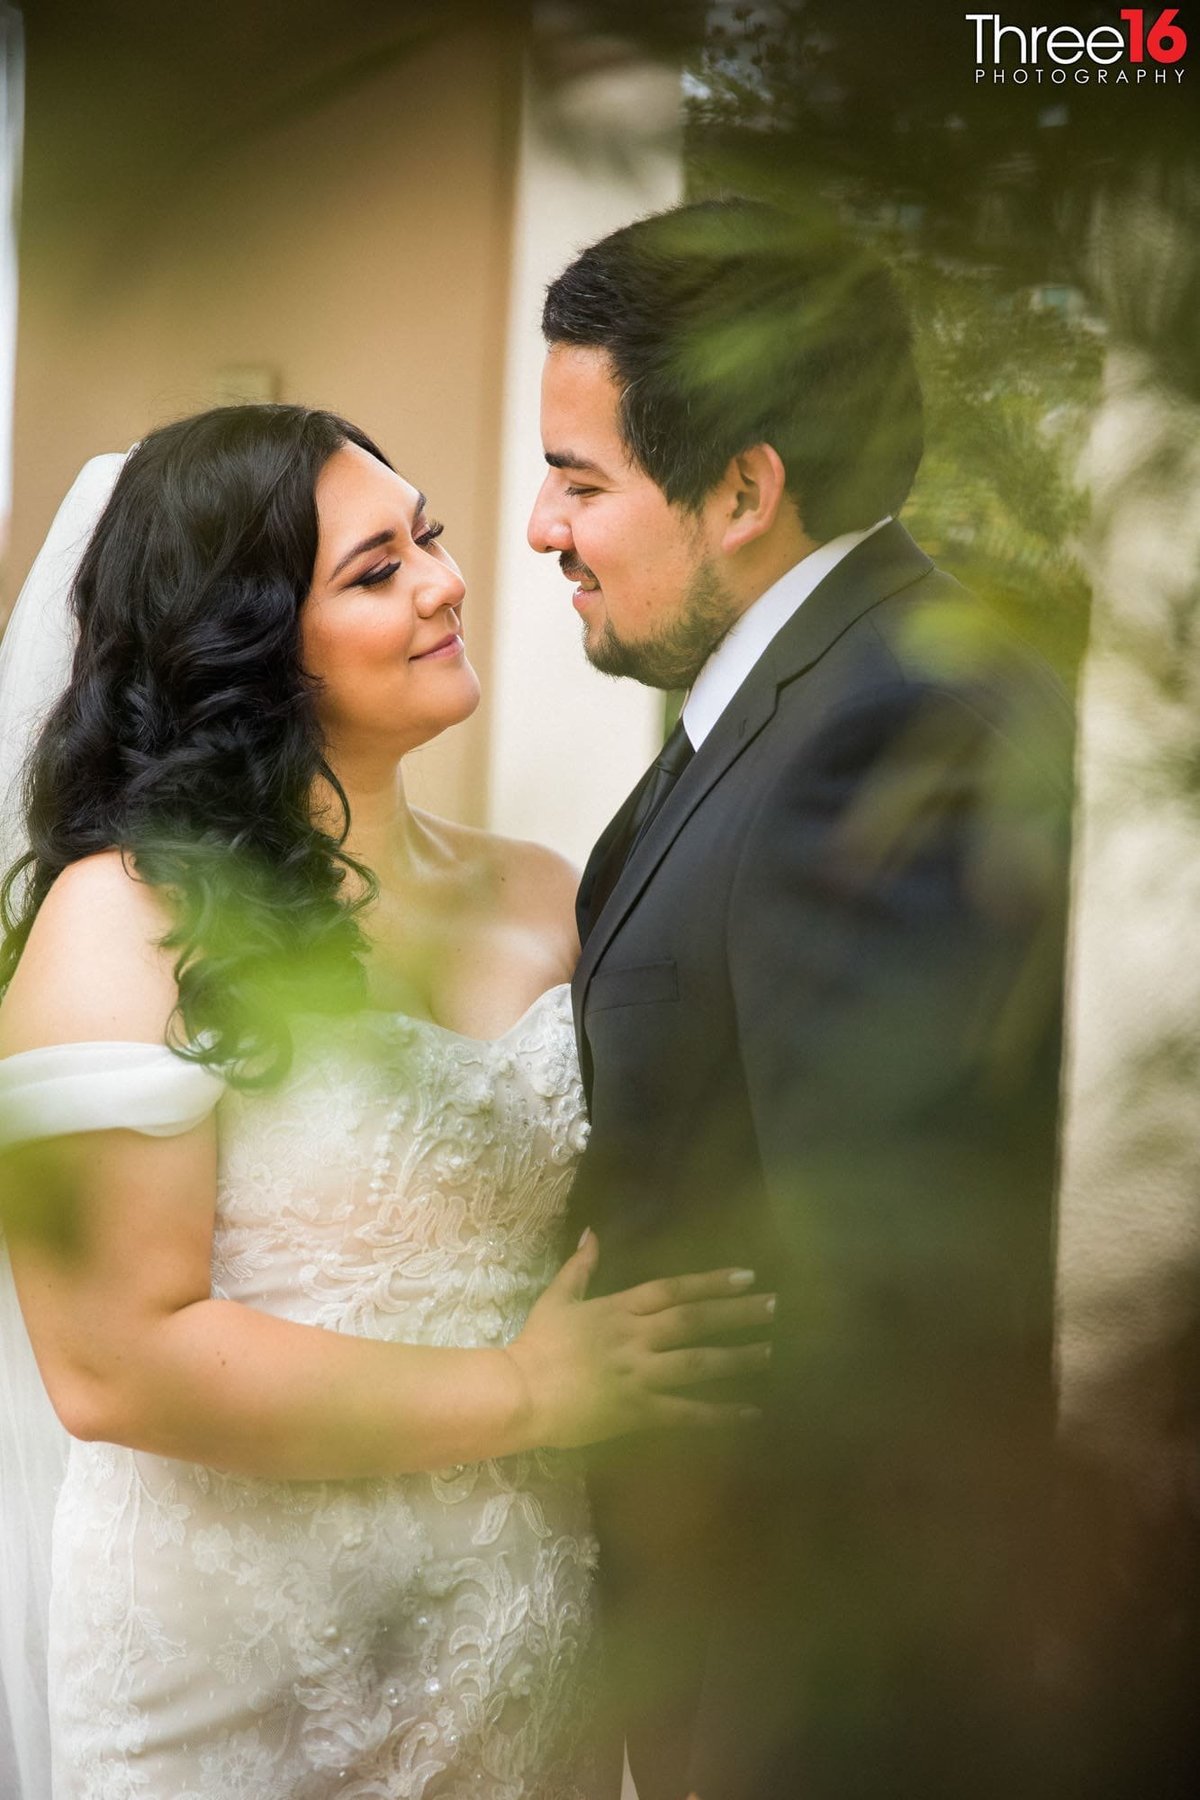 Bride and Groom share an intimate moment together behind some tree branches